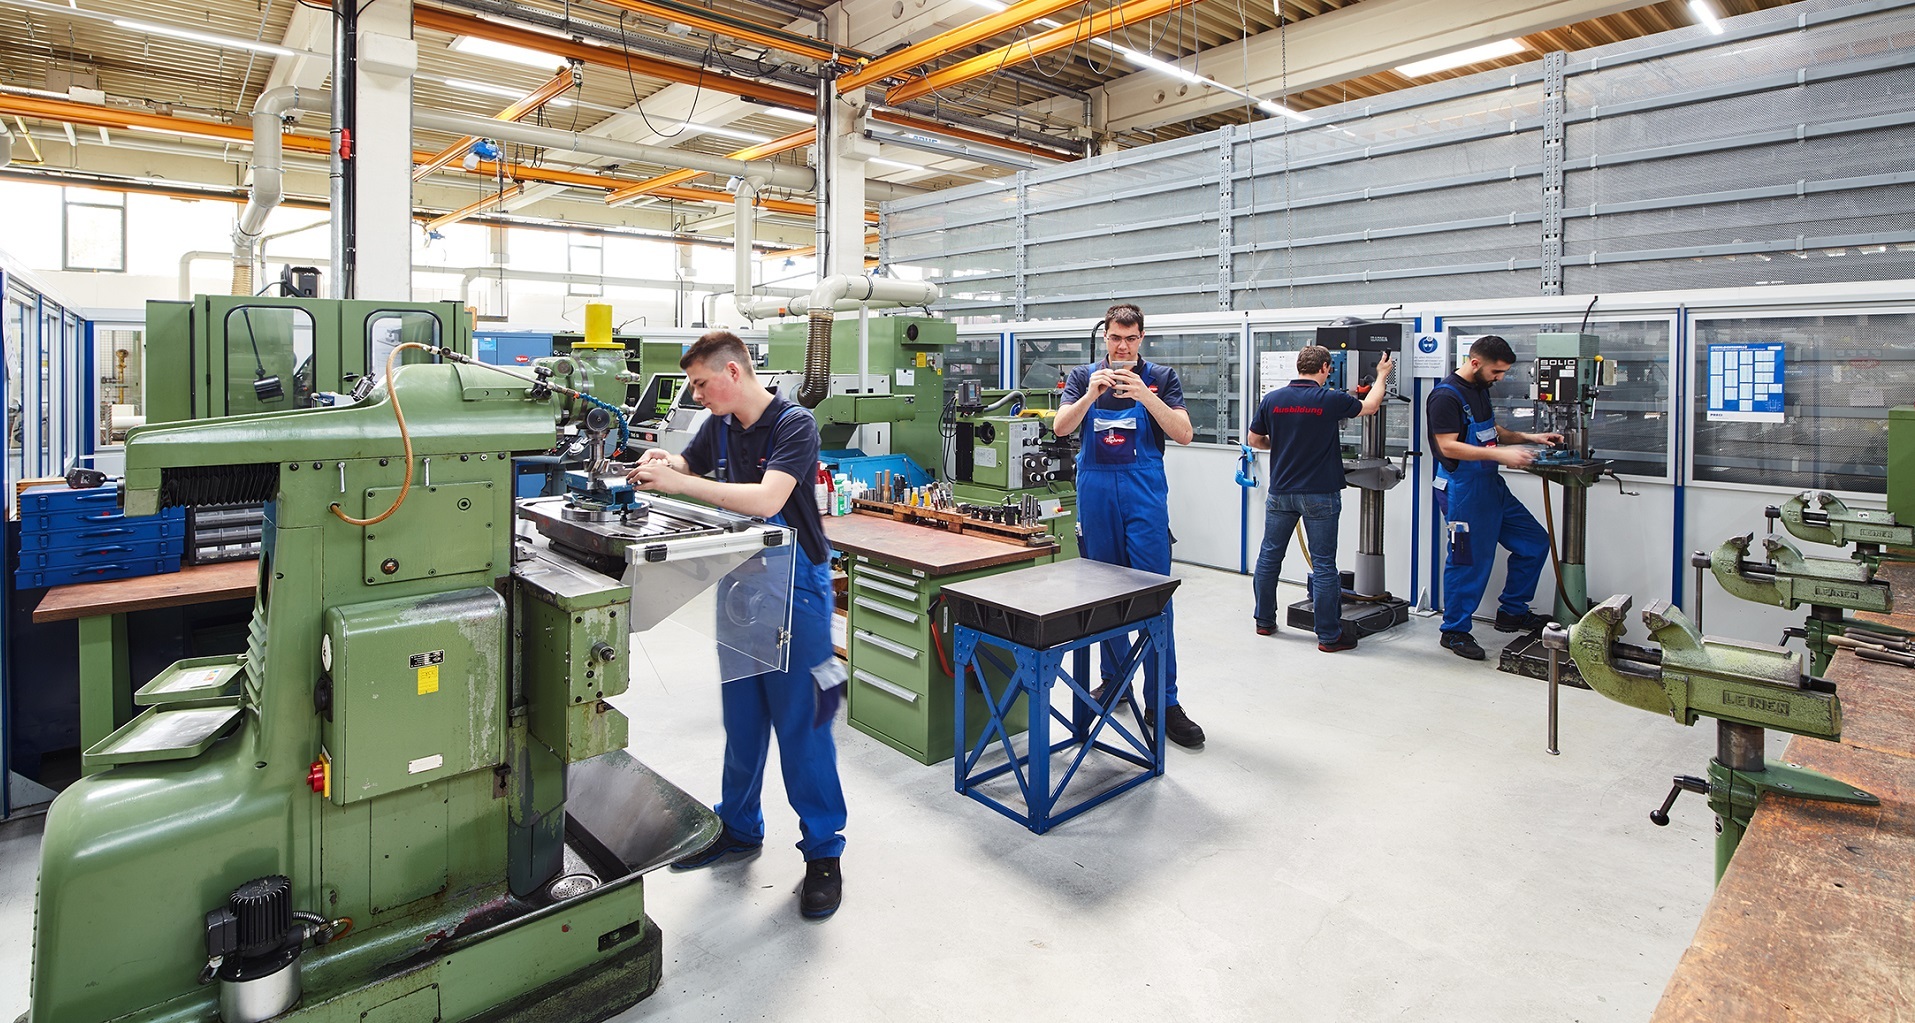 Mehrer Training workshop for trainees on the lathe, grinding machine and milling machine